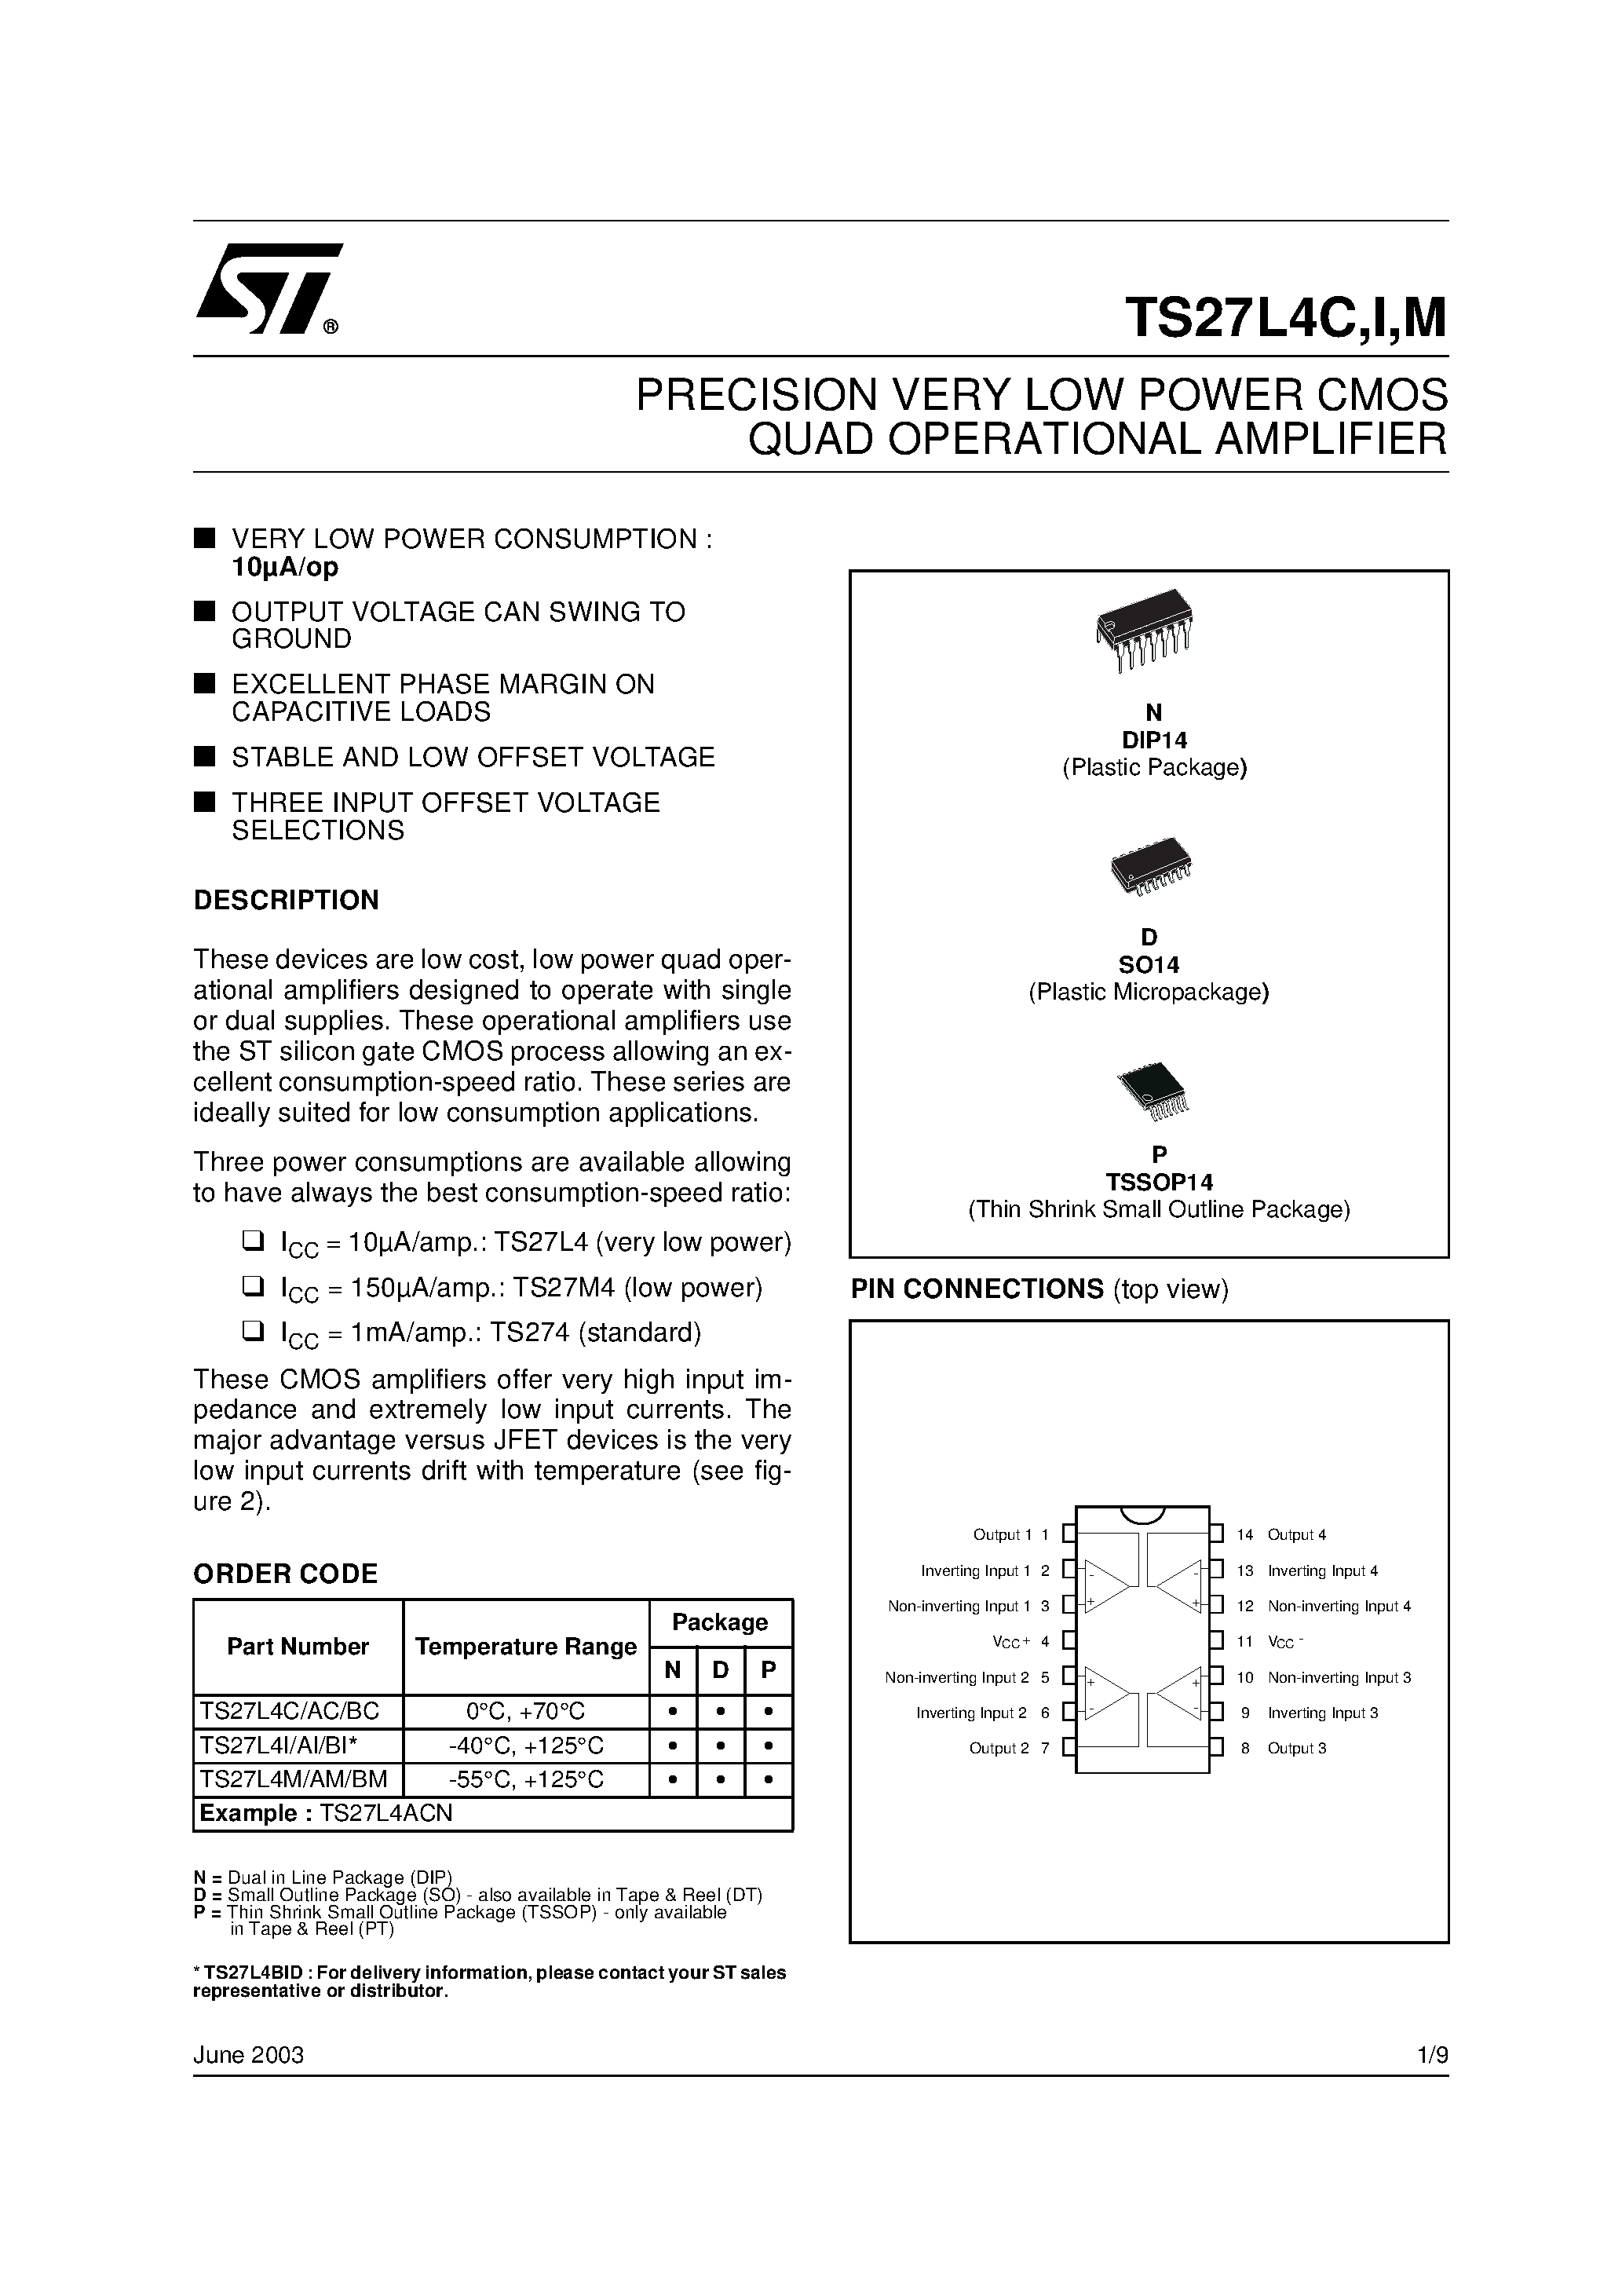 Datasheet TS27L4CN - PRECISION VERY LOW POWER CMOS QUAD OPERATIONAL AMPLIFIER page 1